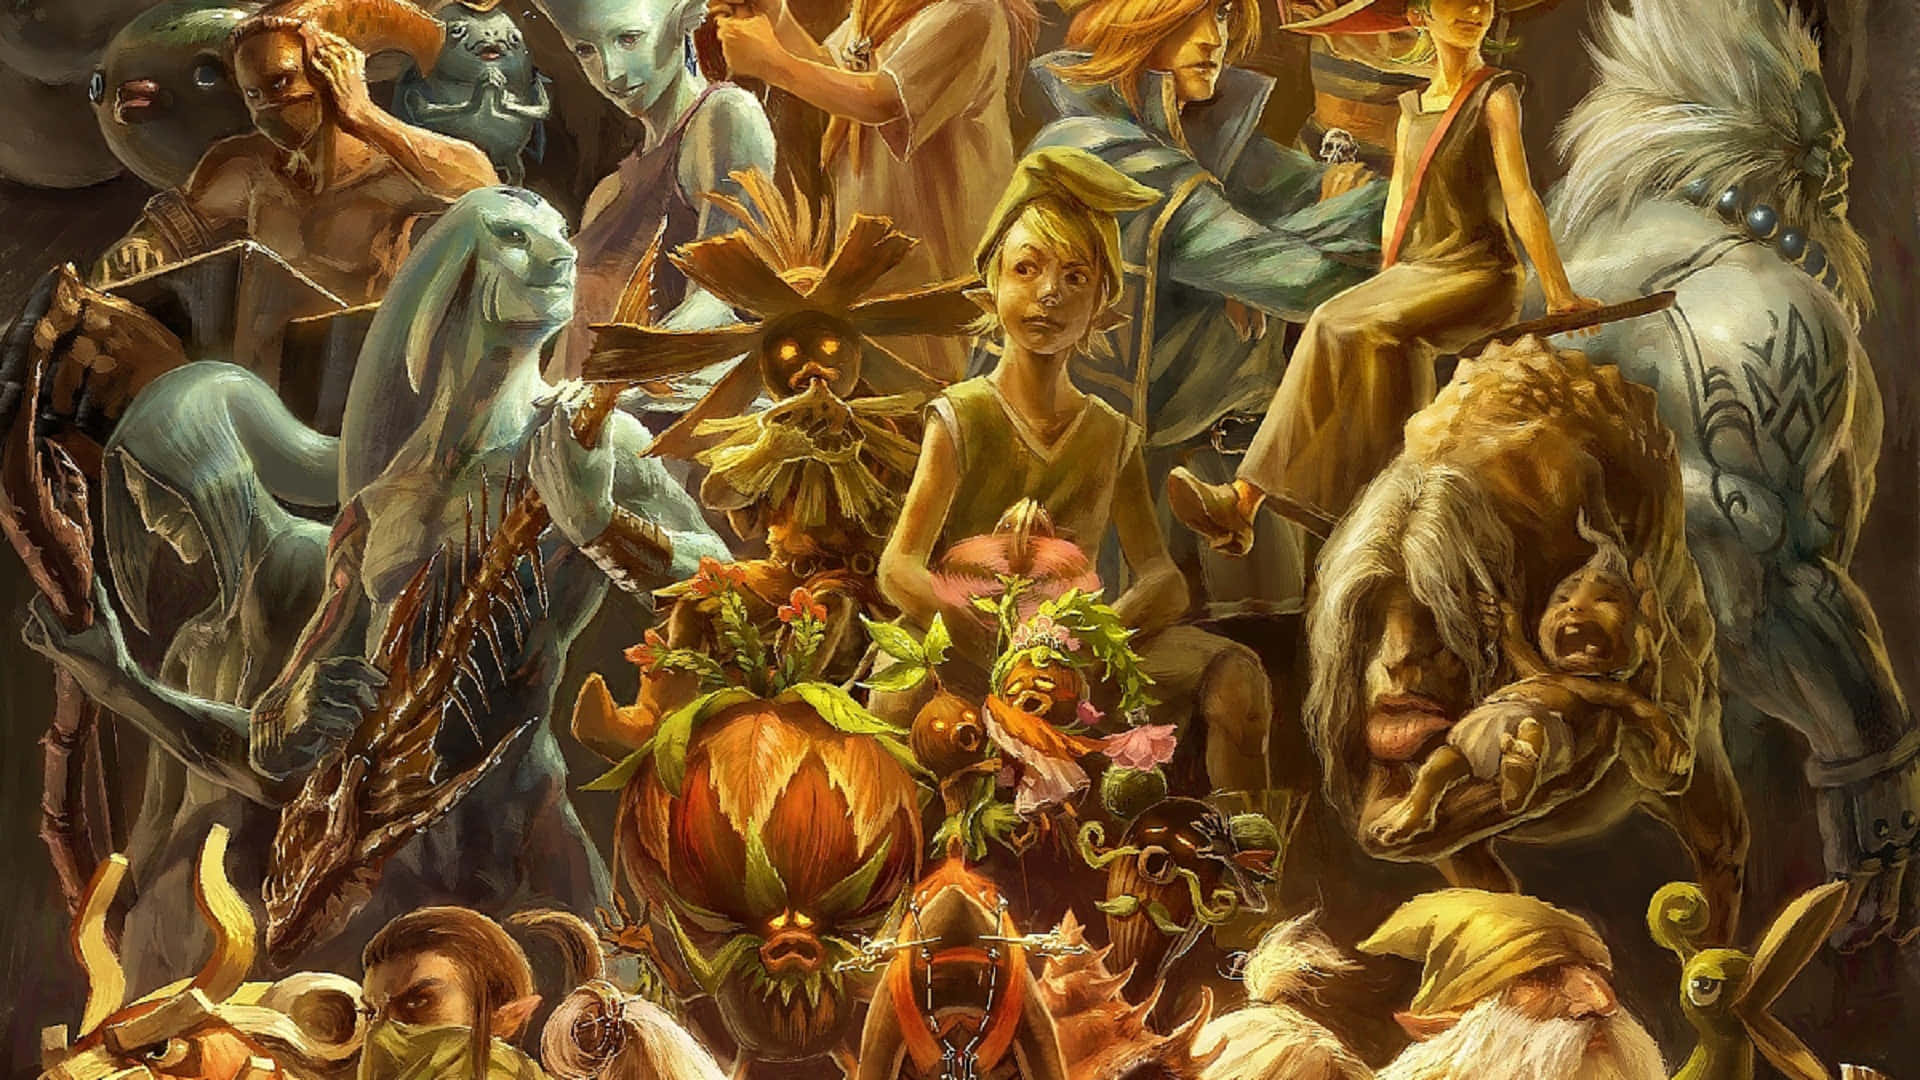 Caption: The Legend of Zelda Characters - A gathering of heroes and allies Wallpaper